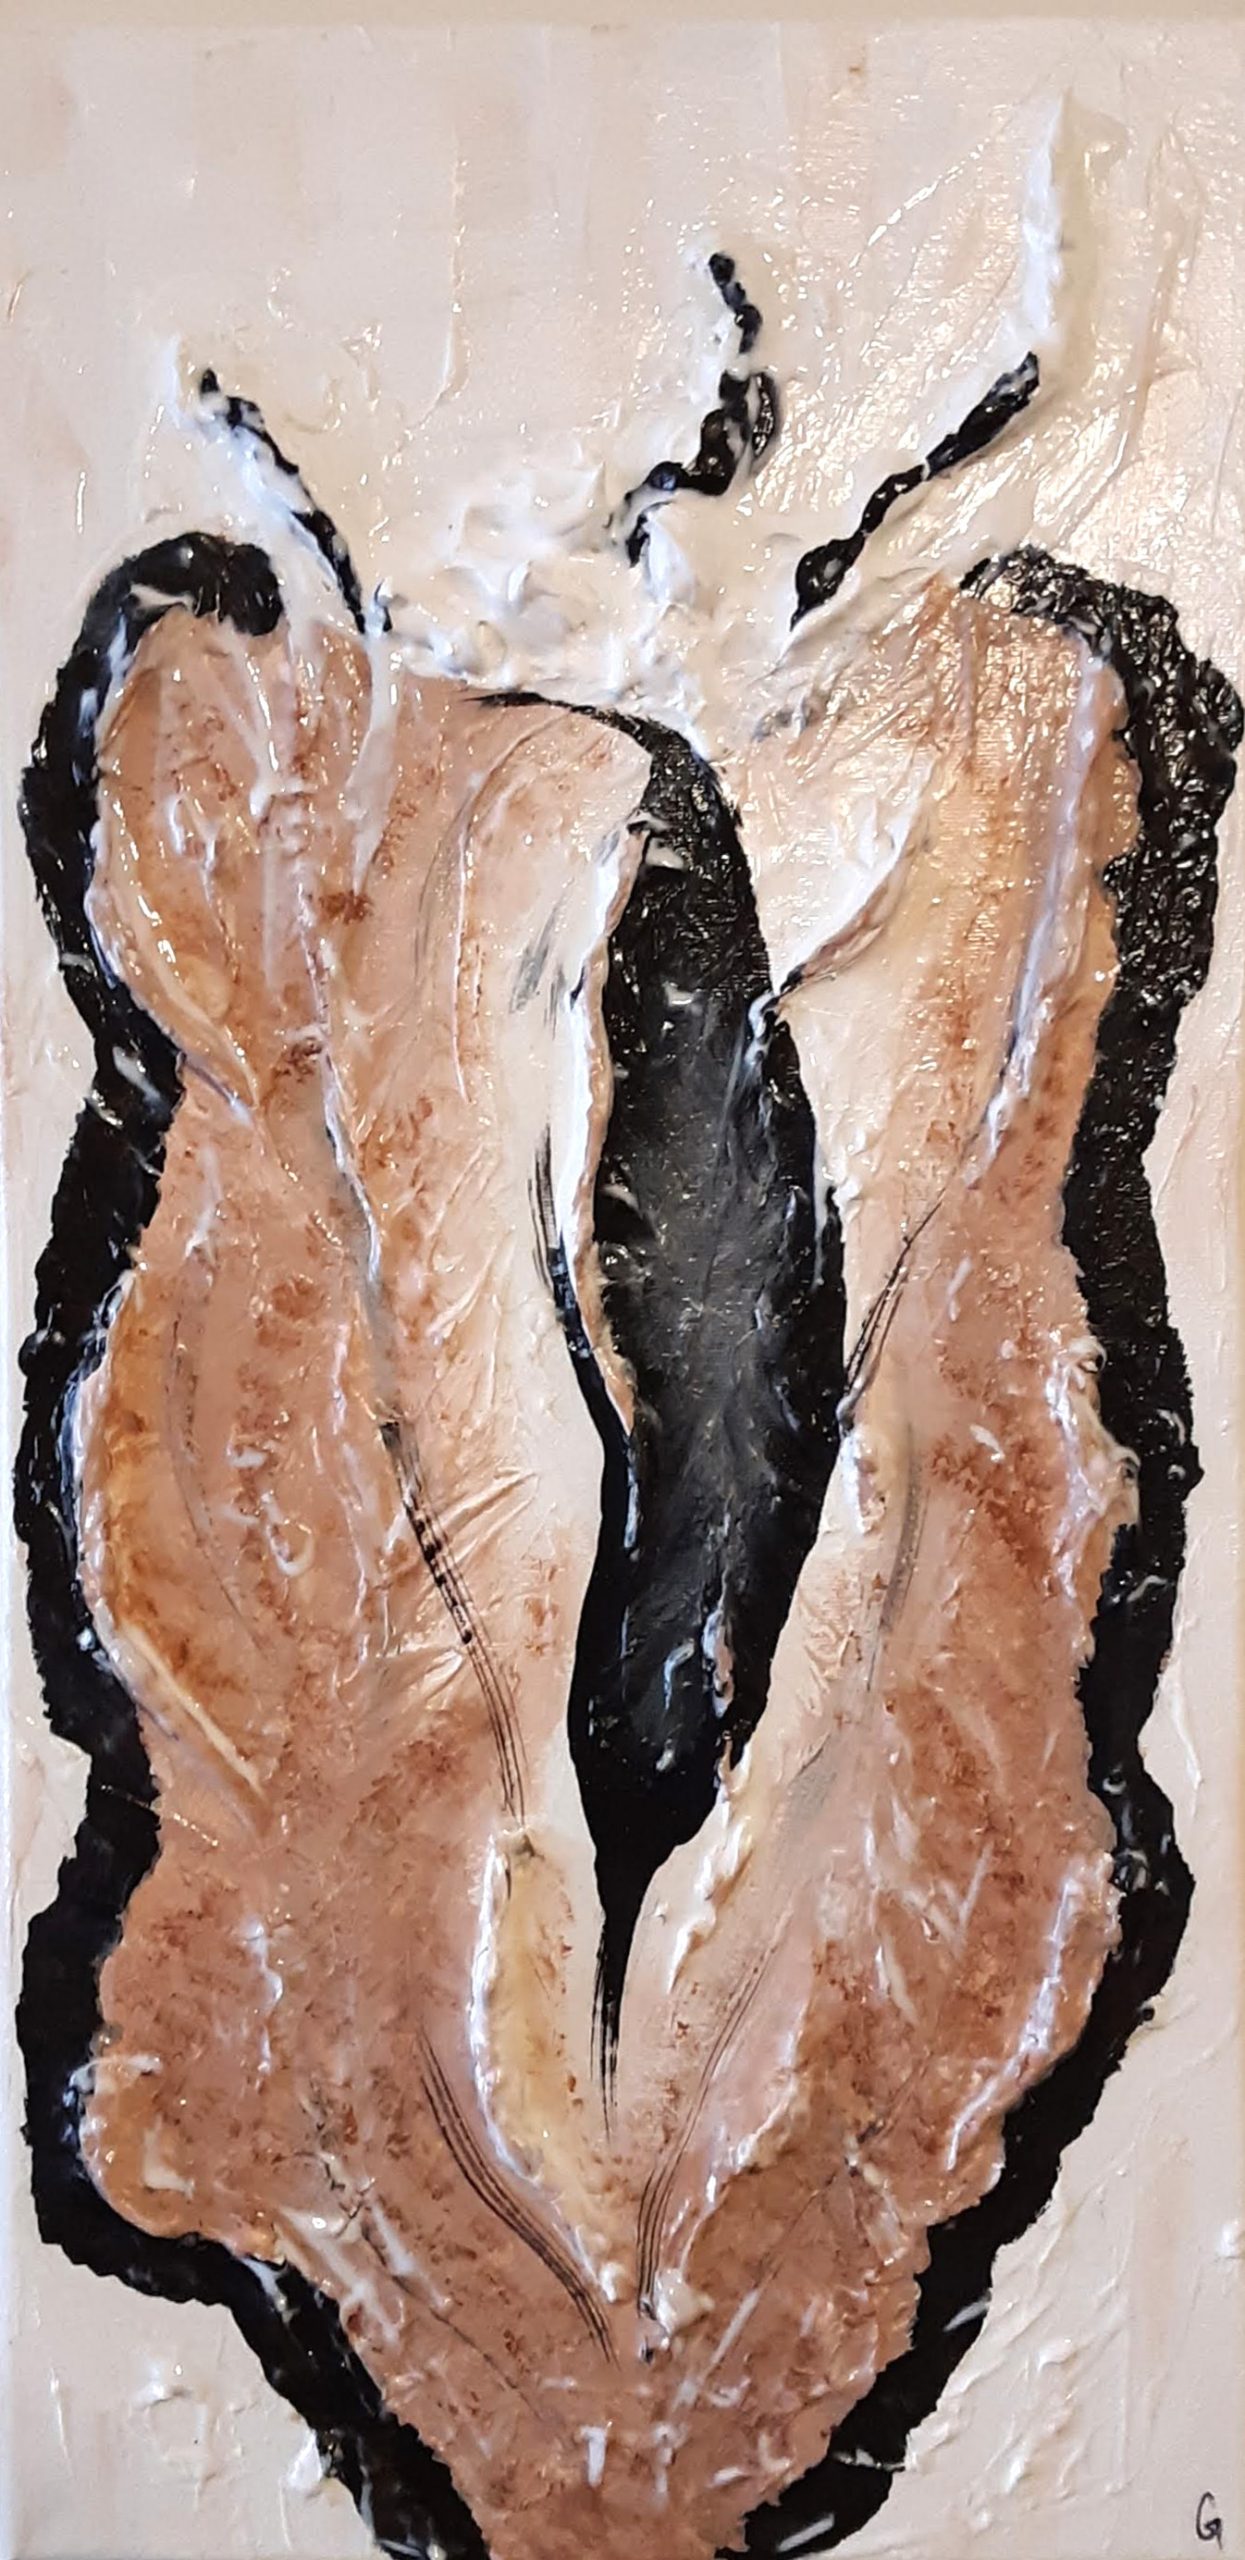 Glossy, textured painting of browns and black on white abstractly resembling a vulva